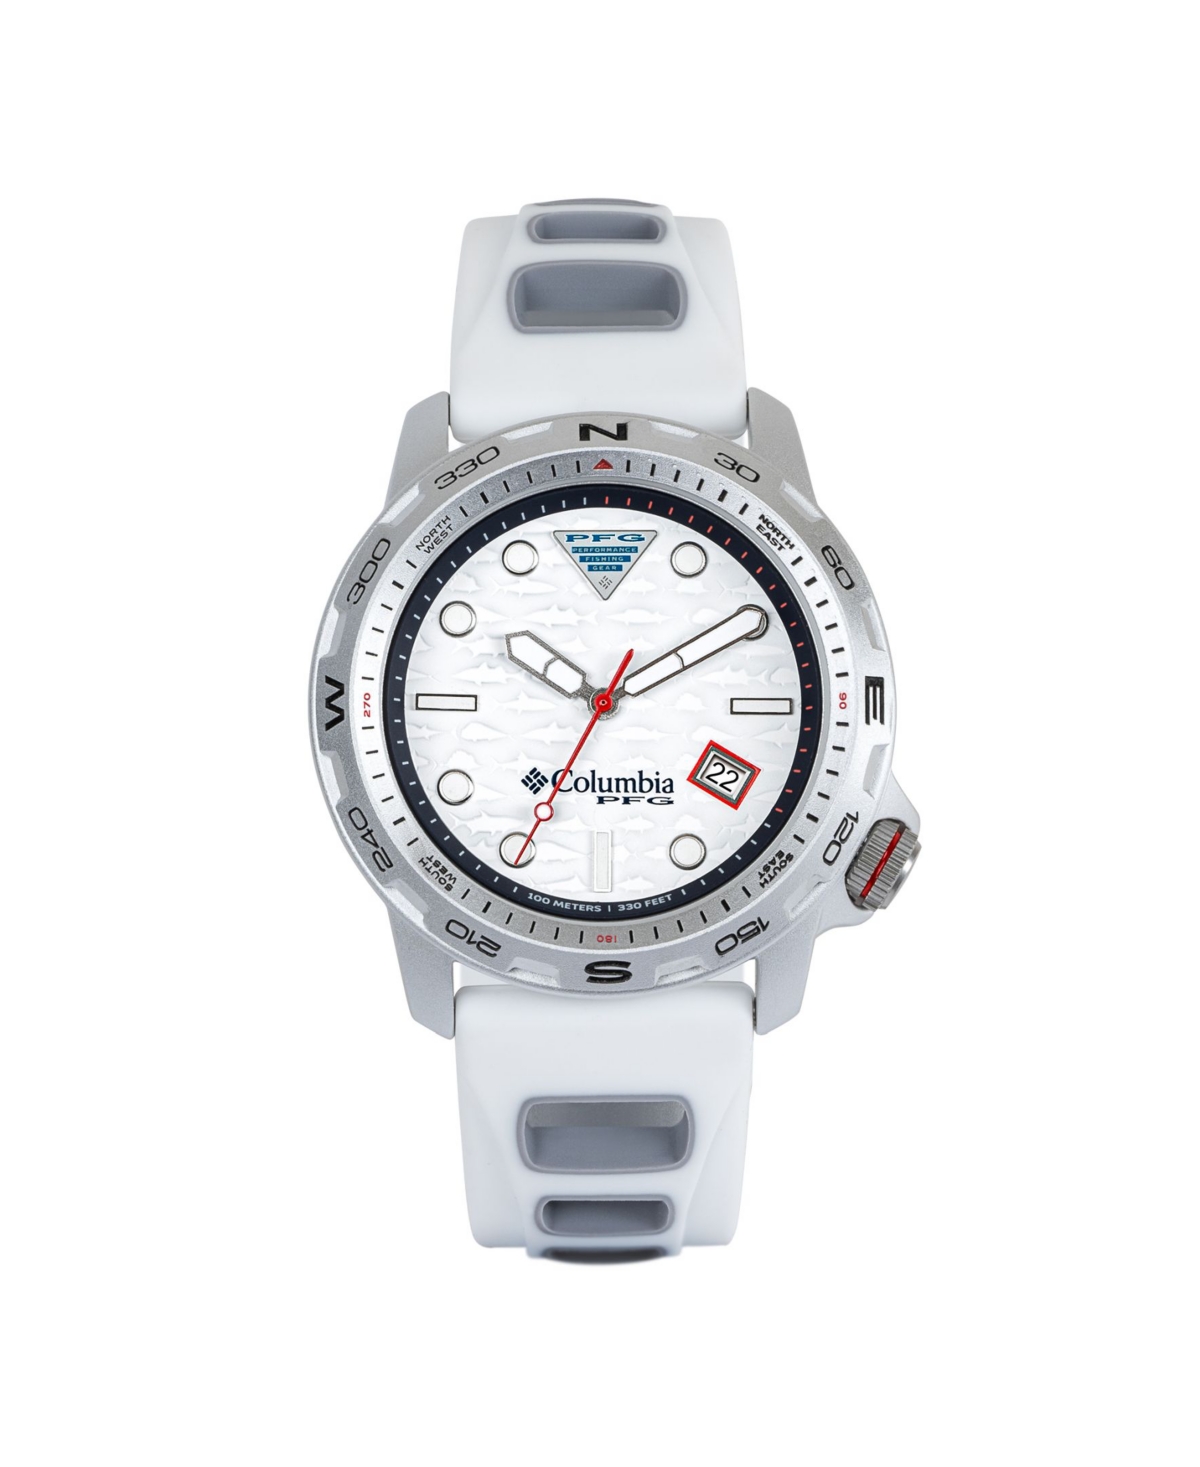 Columbia Unisex Pfg Backcaster White, Gray Silicone Strap Watch, 43mm